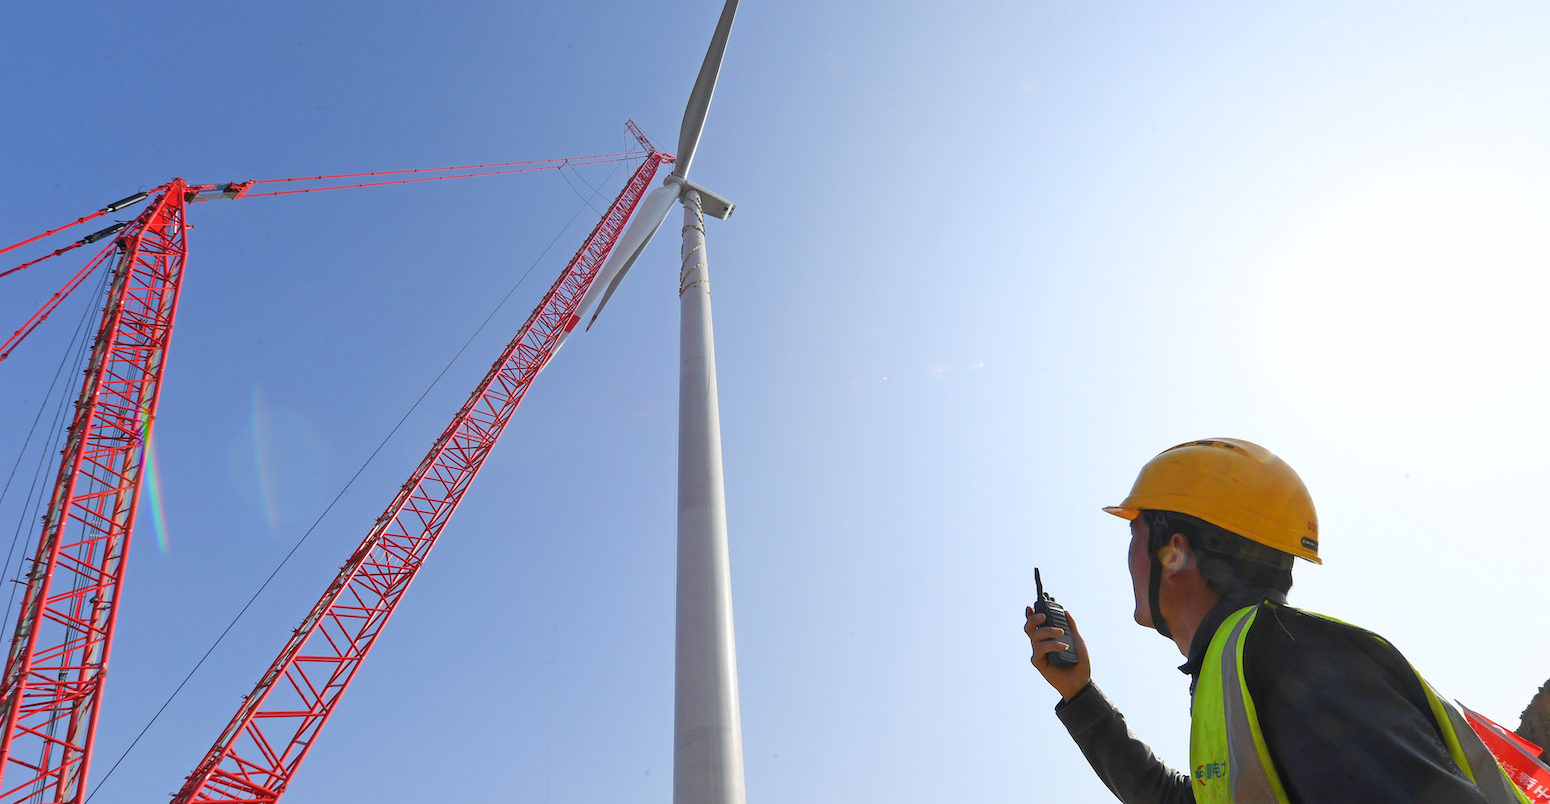 Technical workers installing equipment at Zhangpuying Wind Farm in Nanqiao District, Chuzhou City, Anhui Province, China